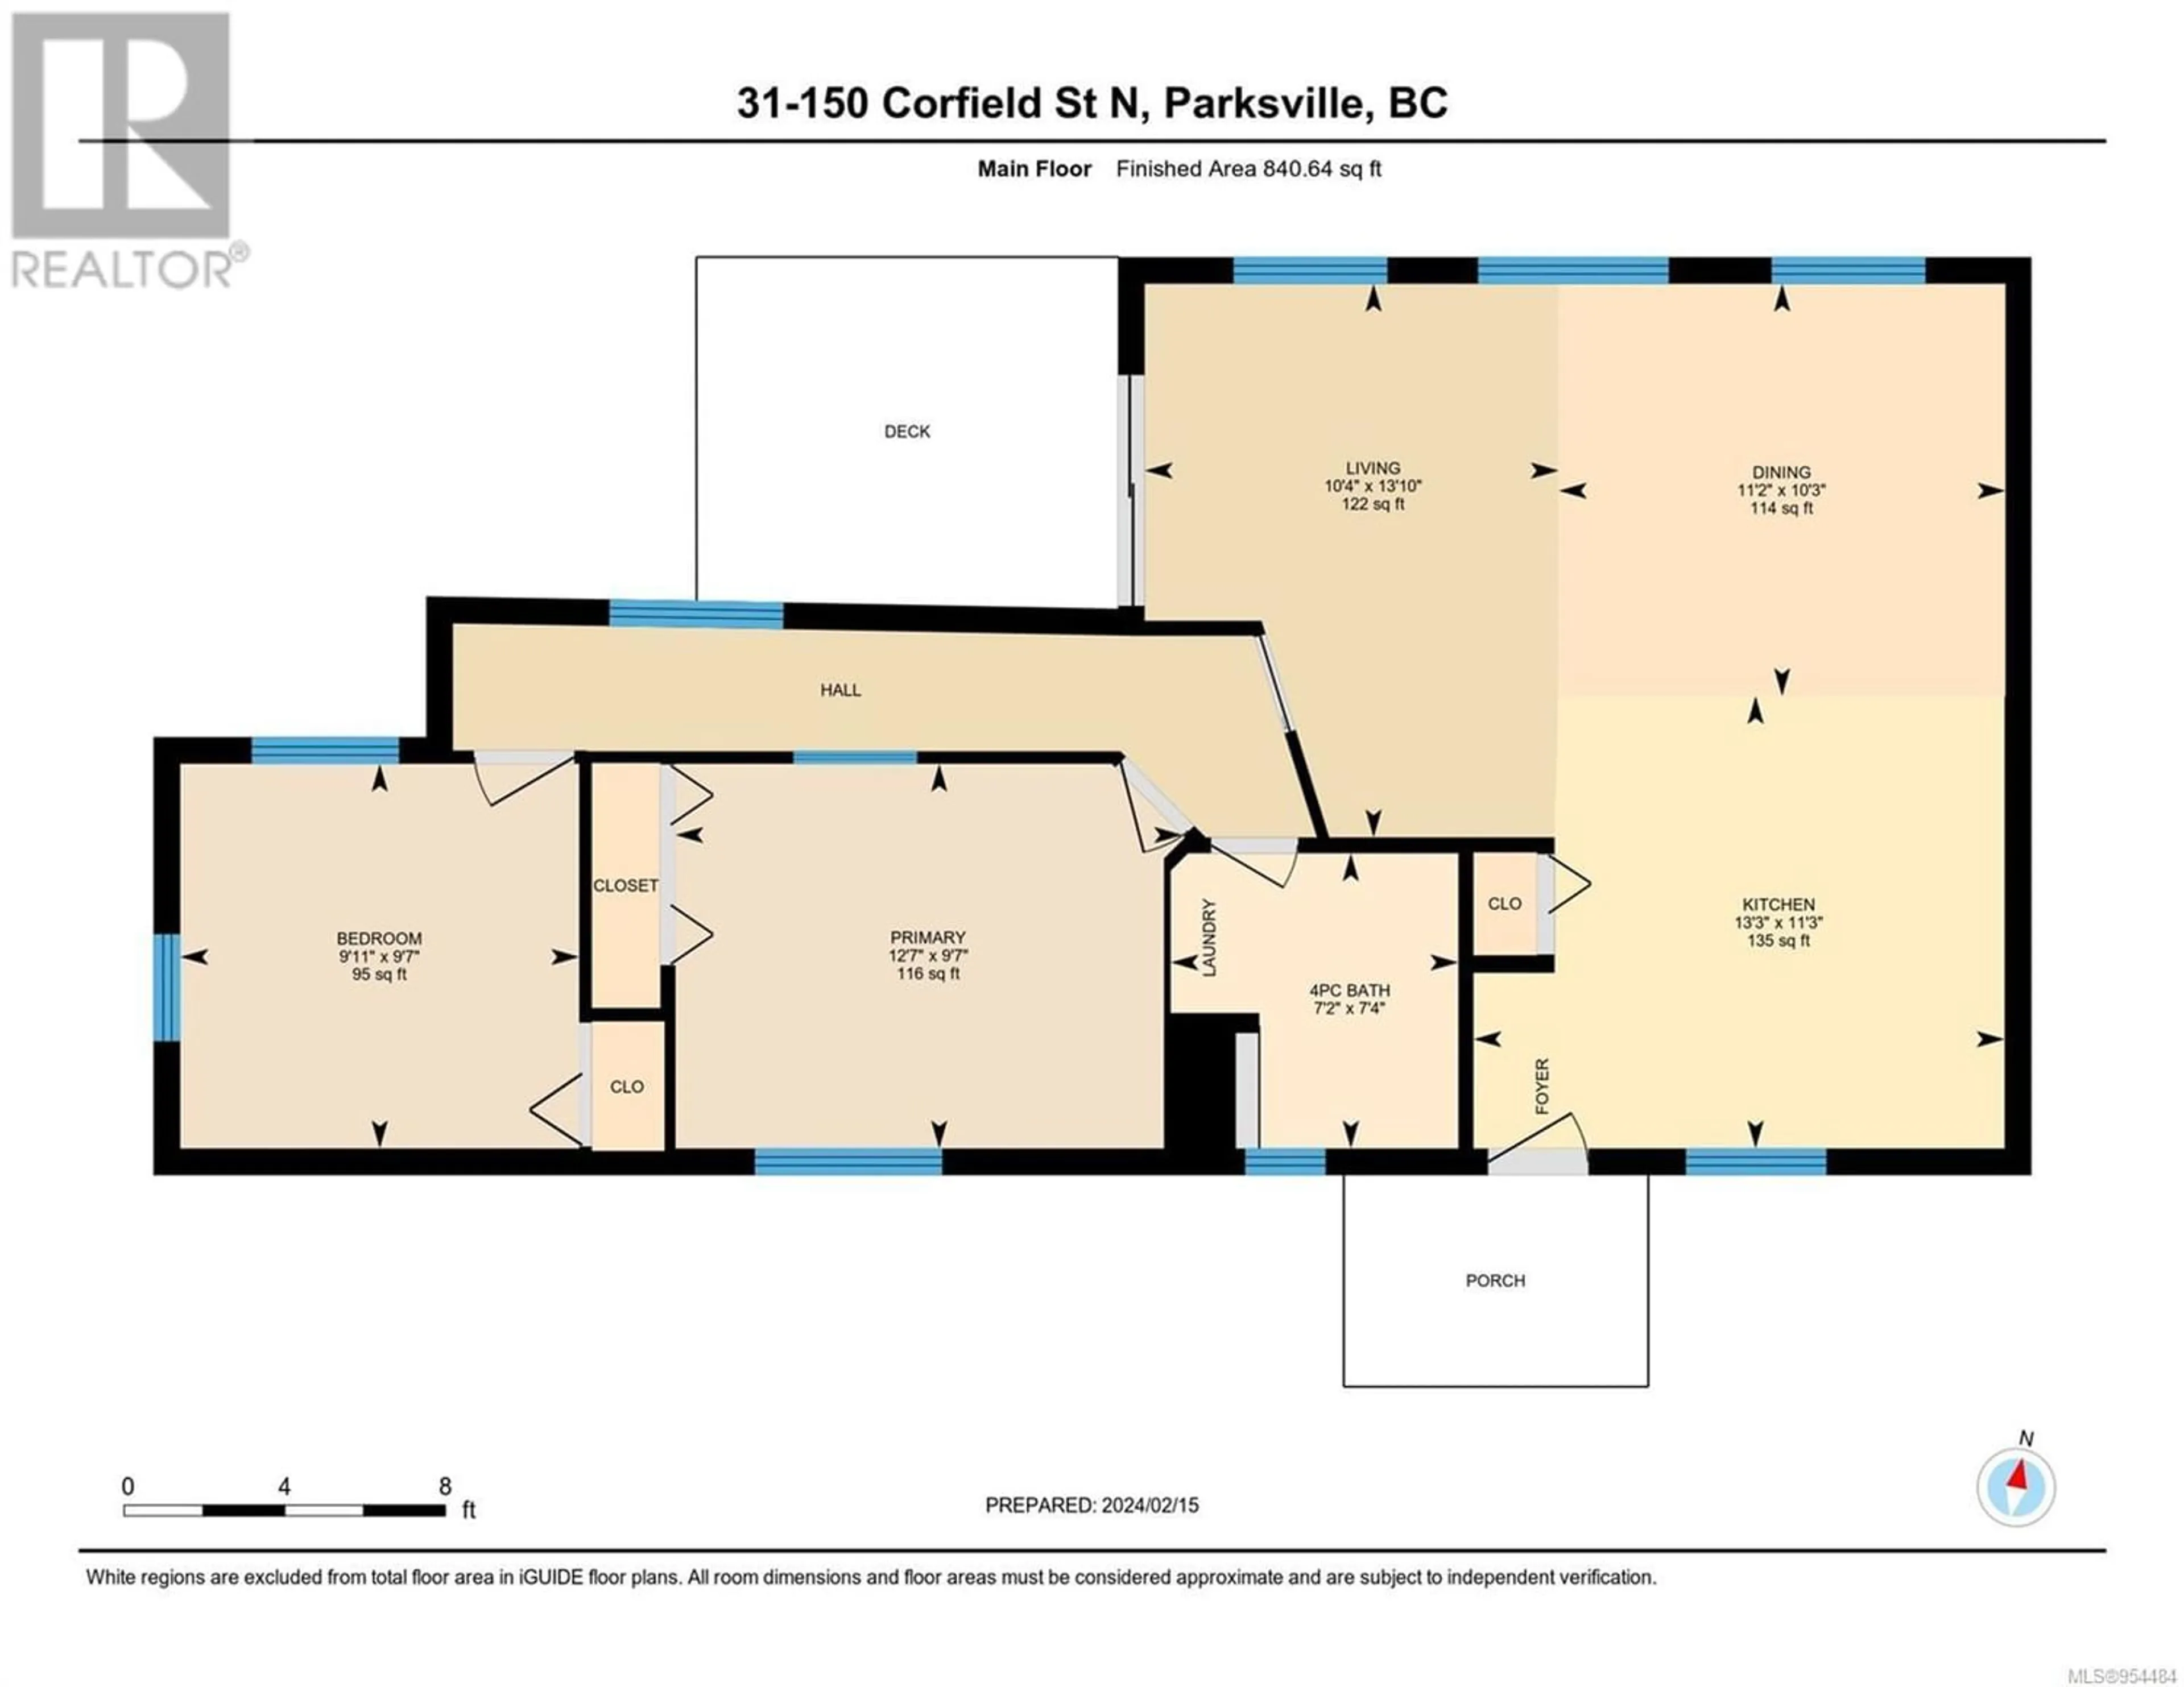 Floor plan for 31 150 Corfield Rd N, Parksville British Columbia V9P1N9